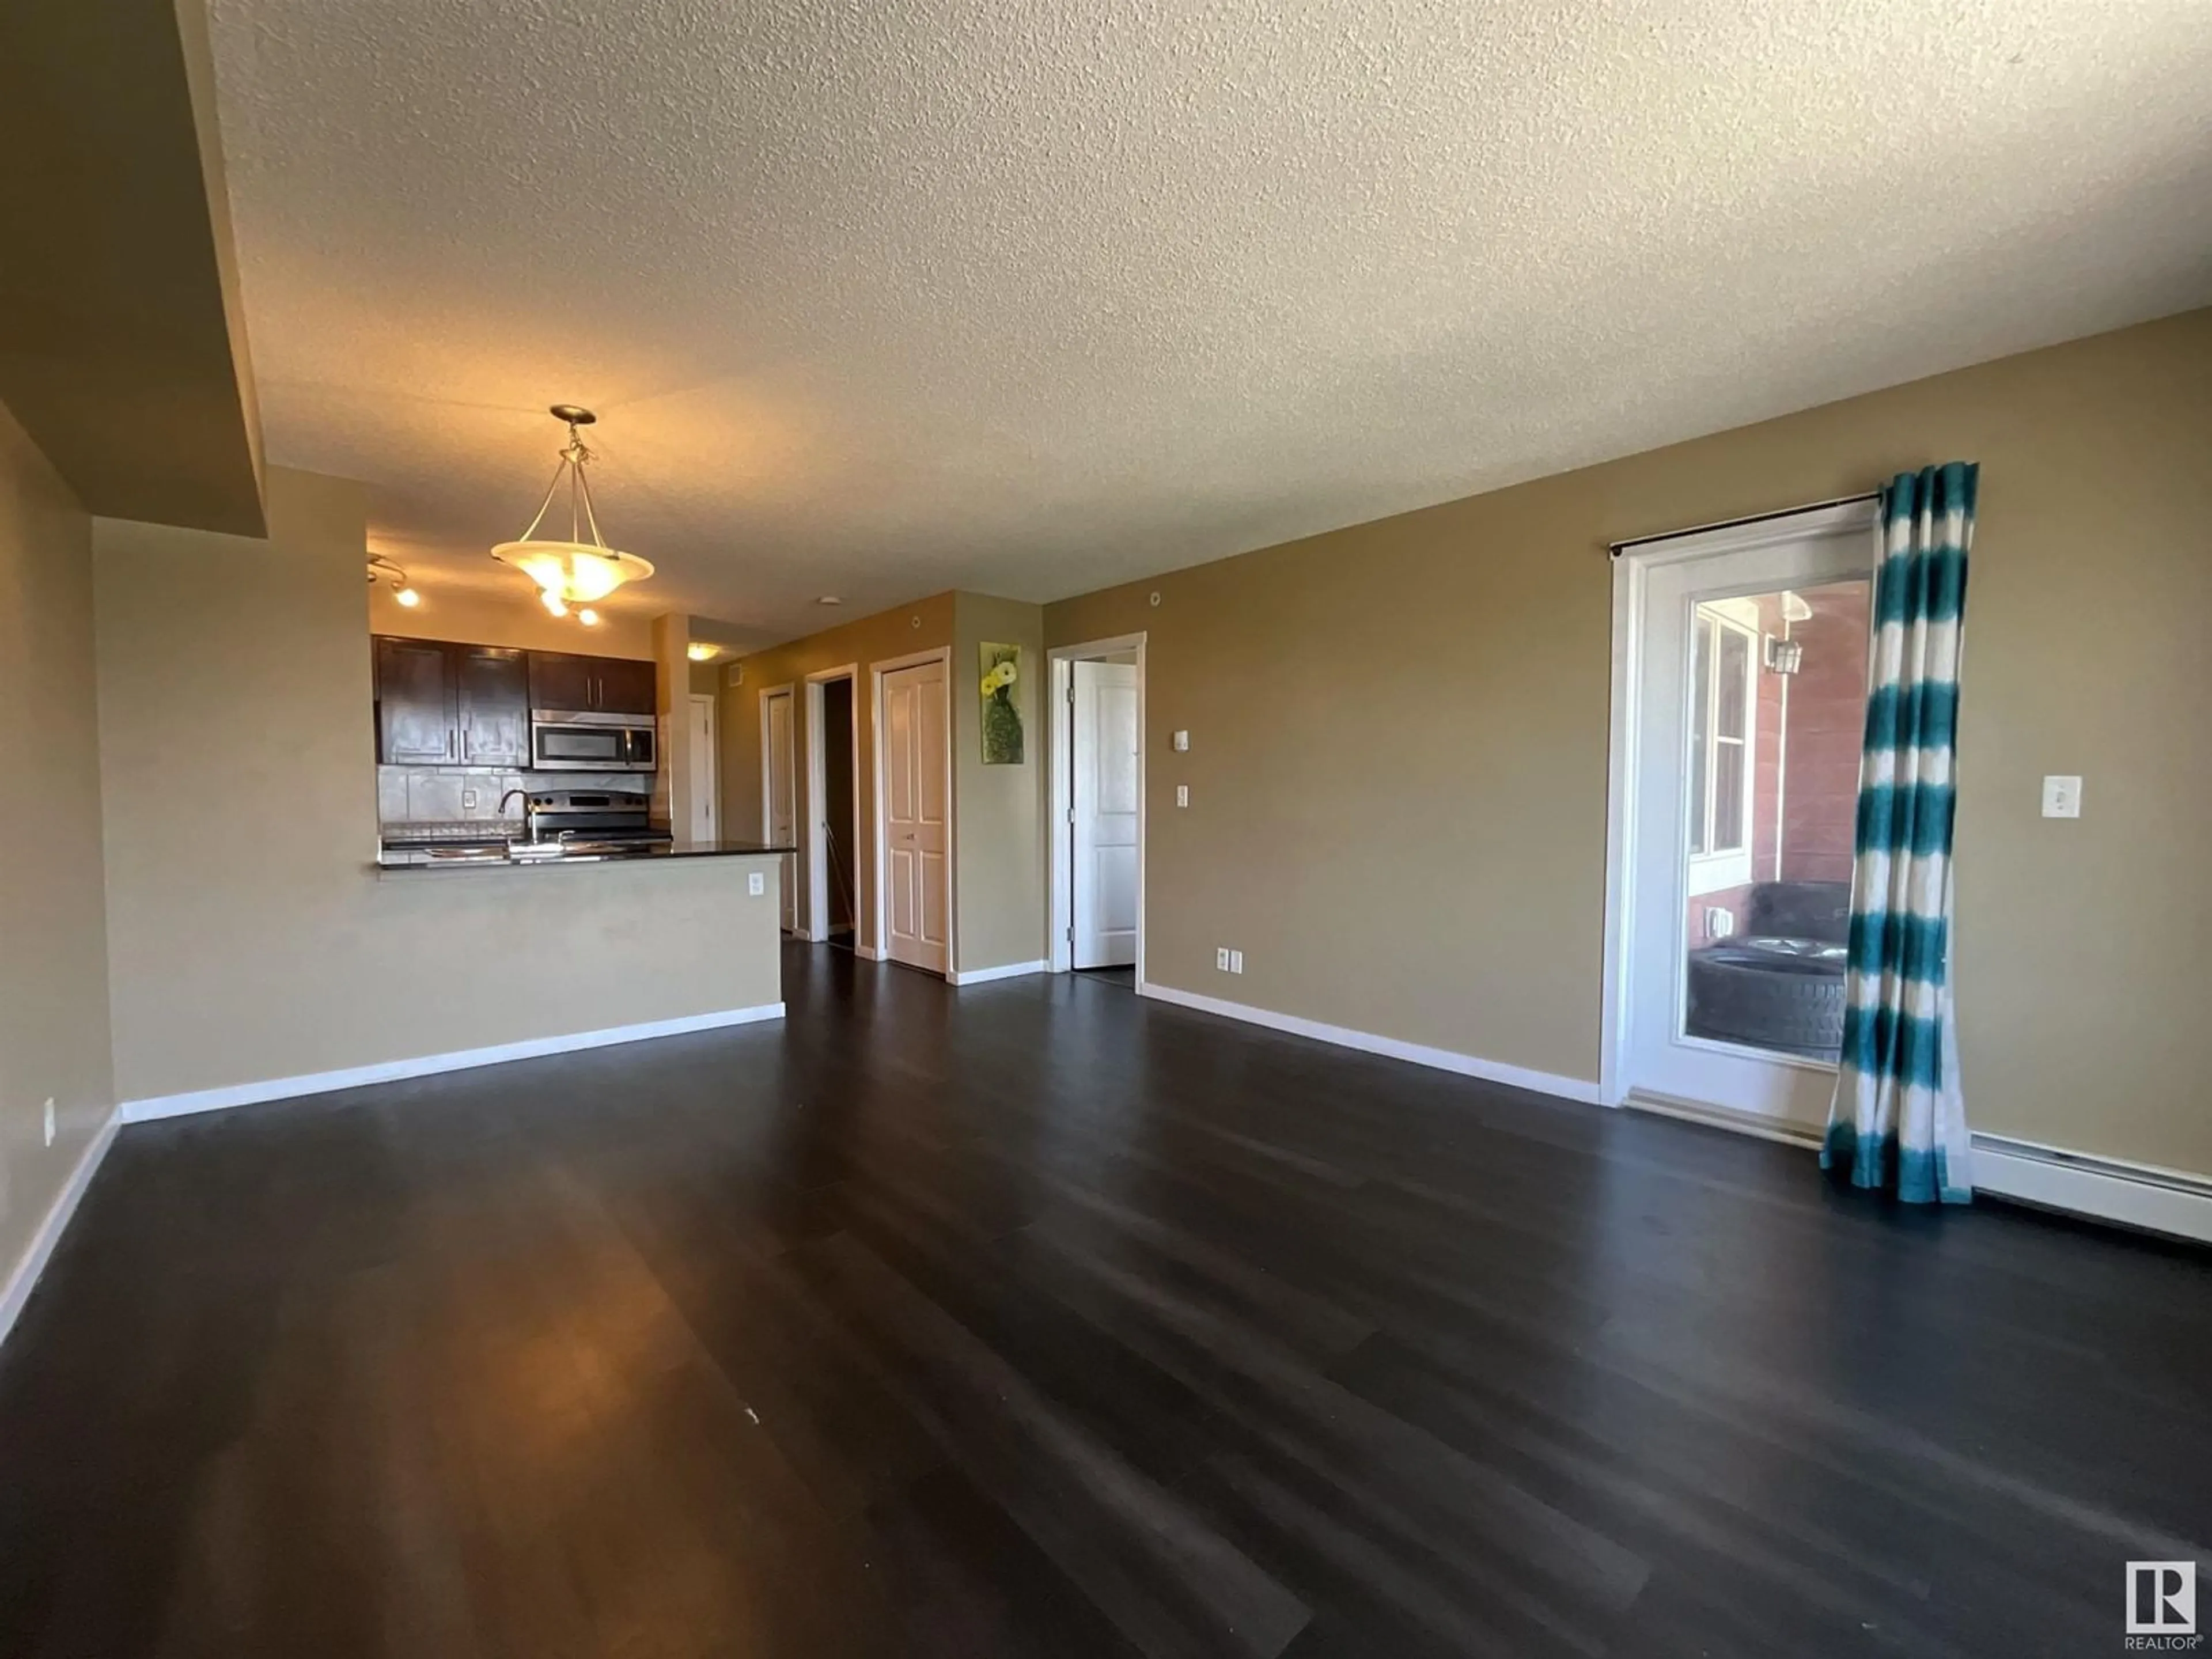 A pic of a room for #408 5370 CHAPPELLE RD SW, Edmonton Alberta T6W3L5